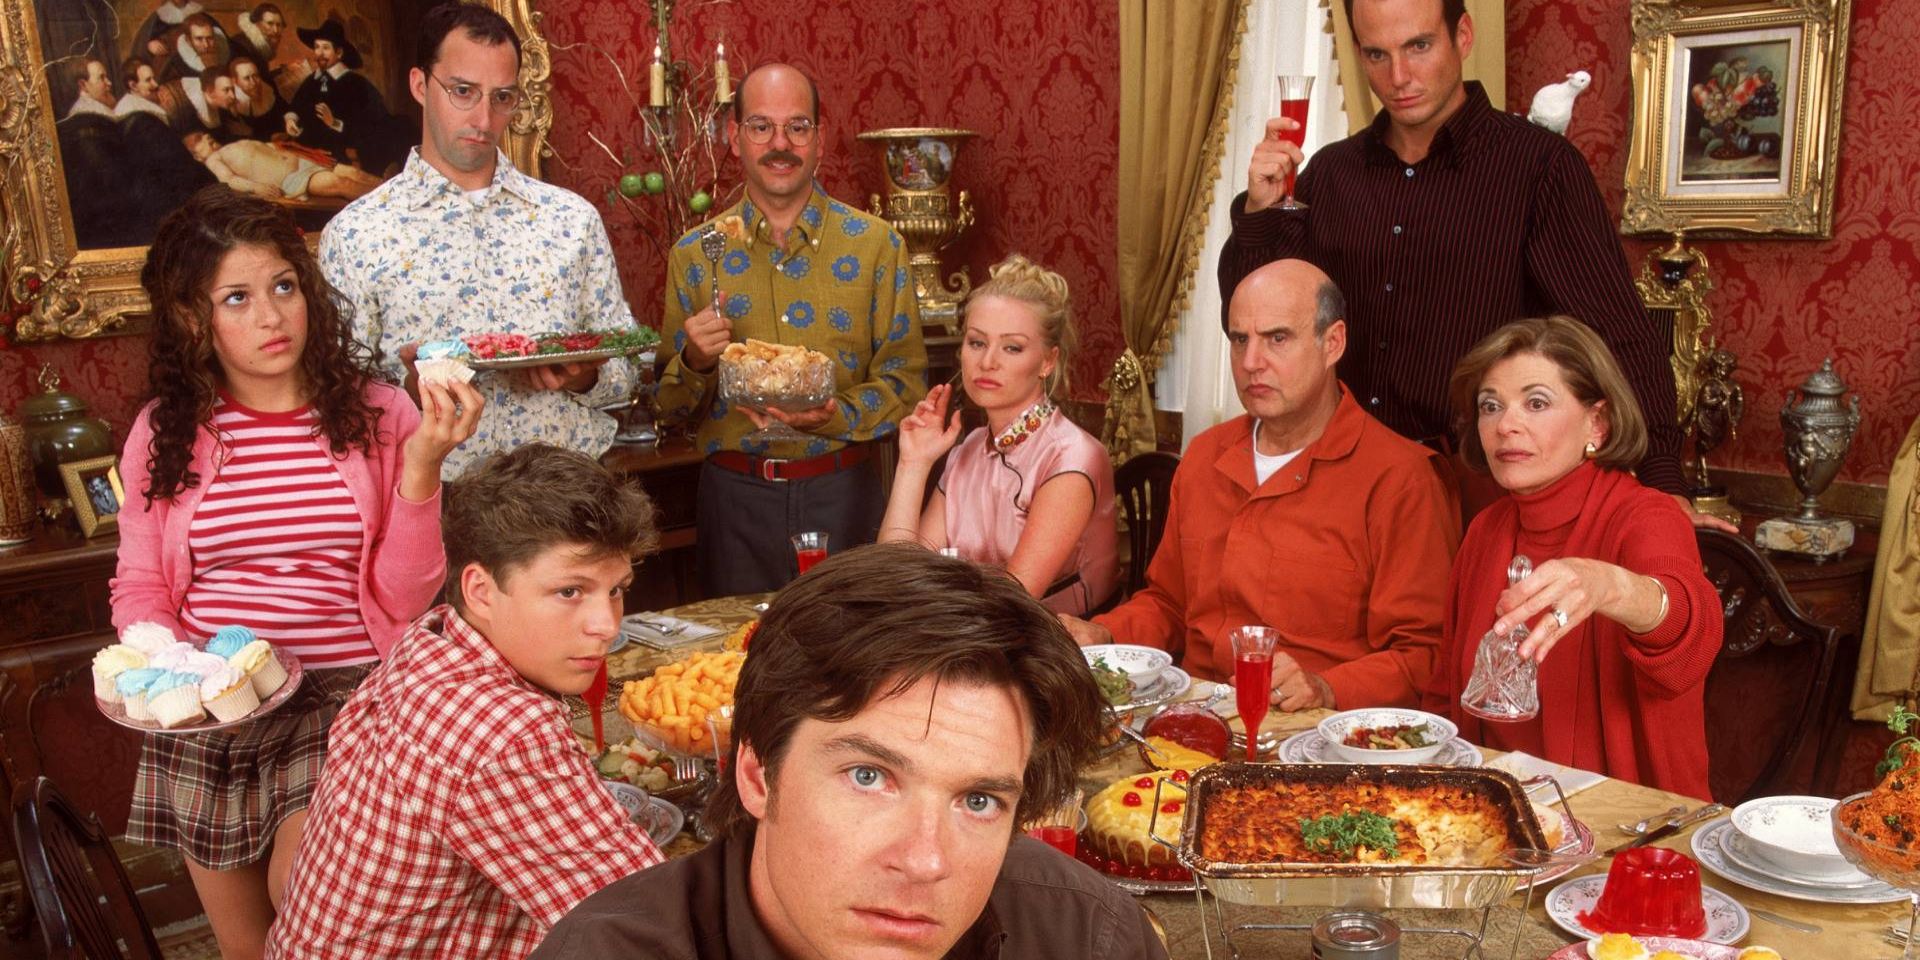 The Bluth family eats dinner at a table in Arrested Development.